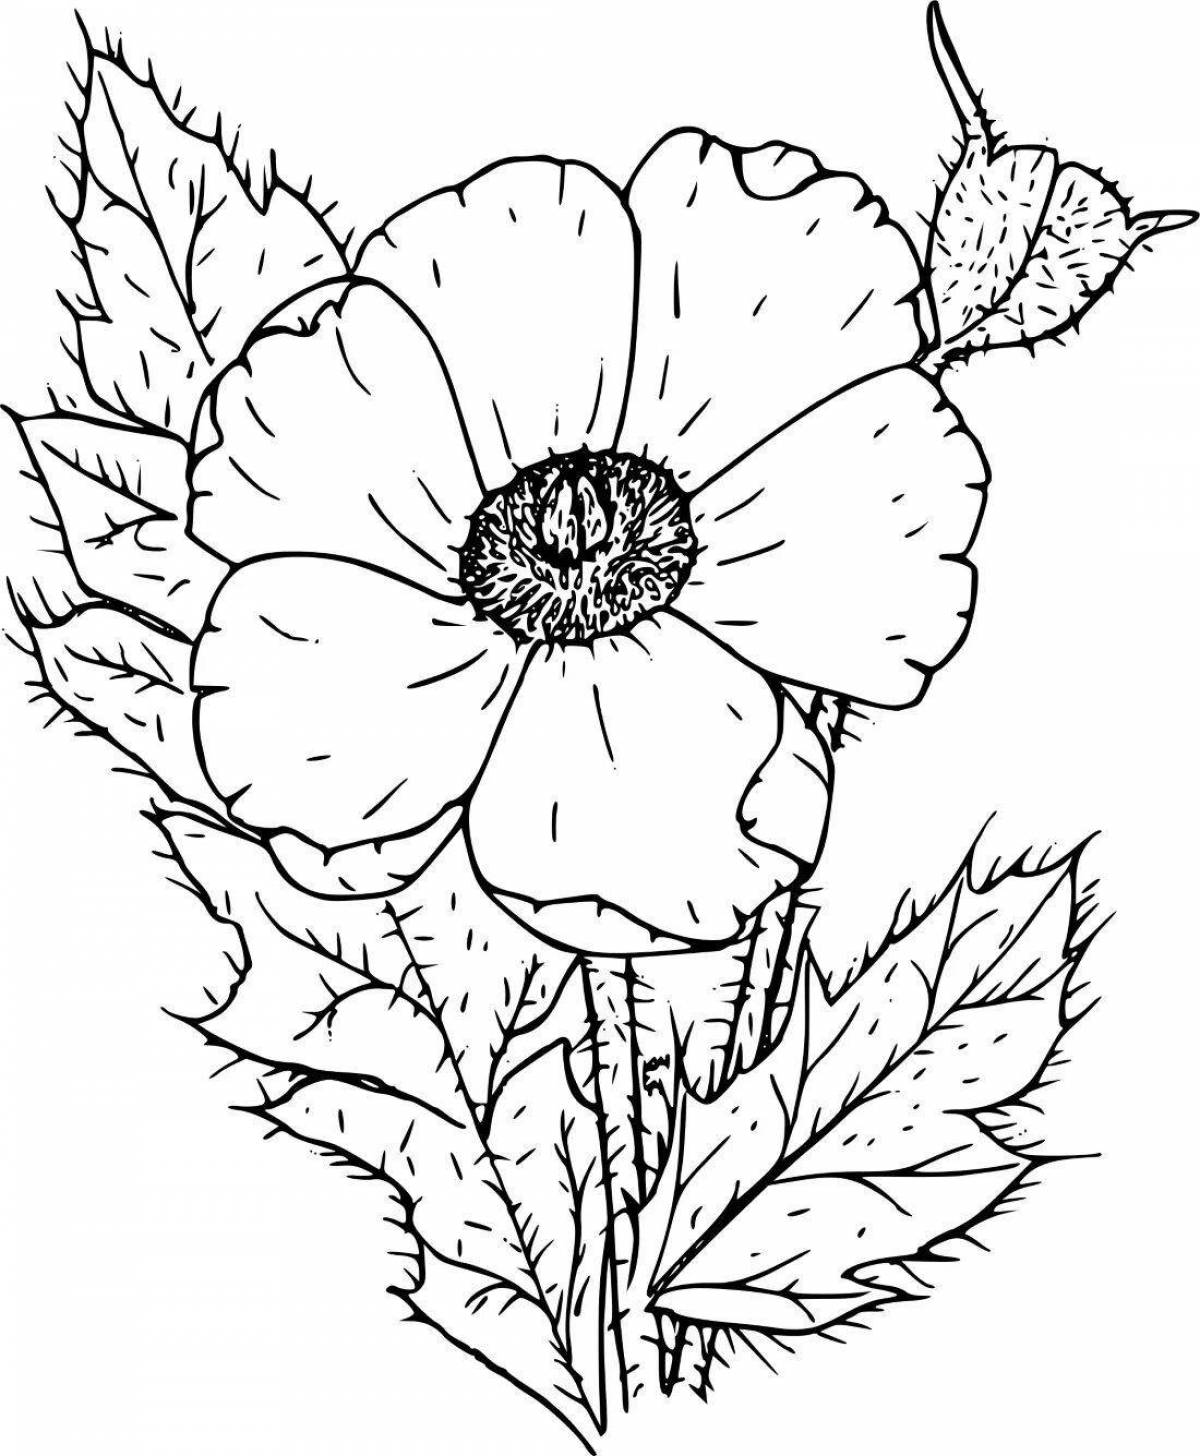 Fun poppy coloring for kids